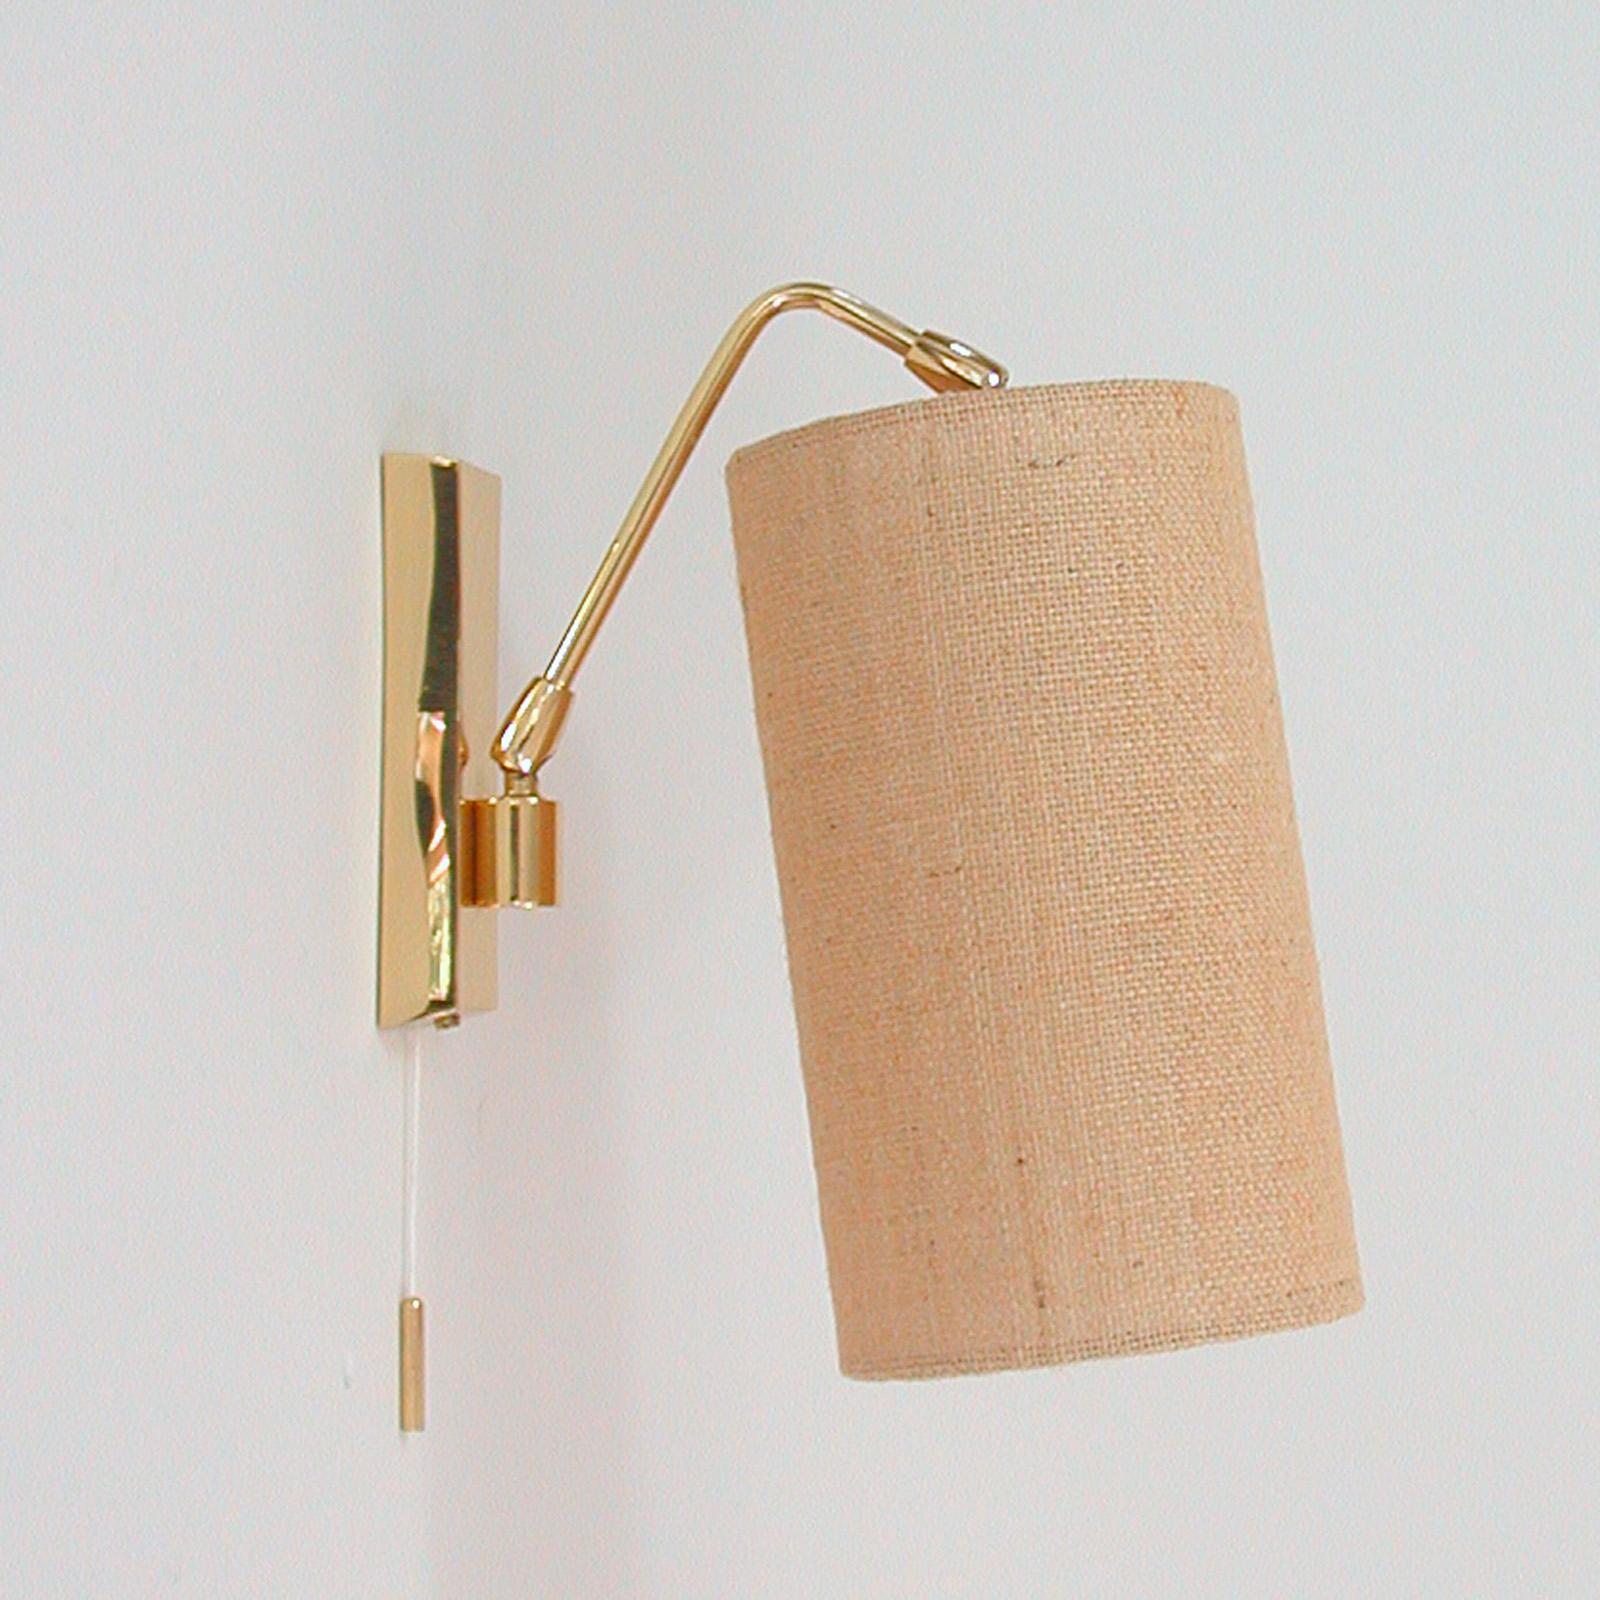 Midcentury Brass and Sisal Adjustable Sconce, Kalmar Attributed., Austria, 1960s For Sale 9